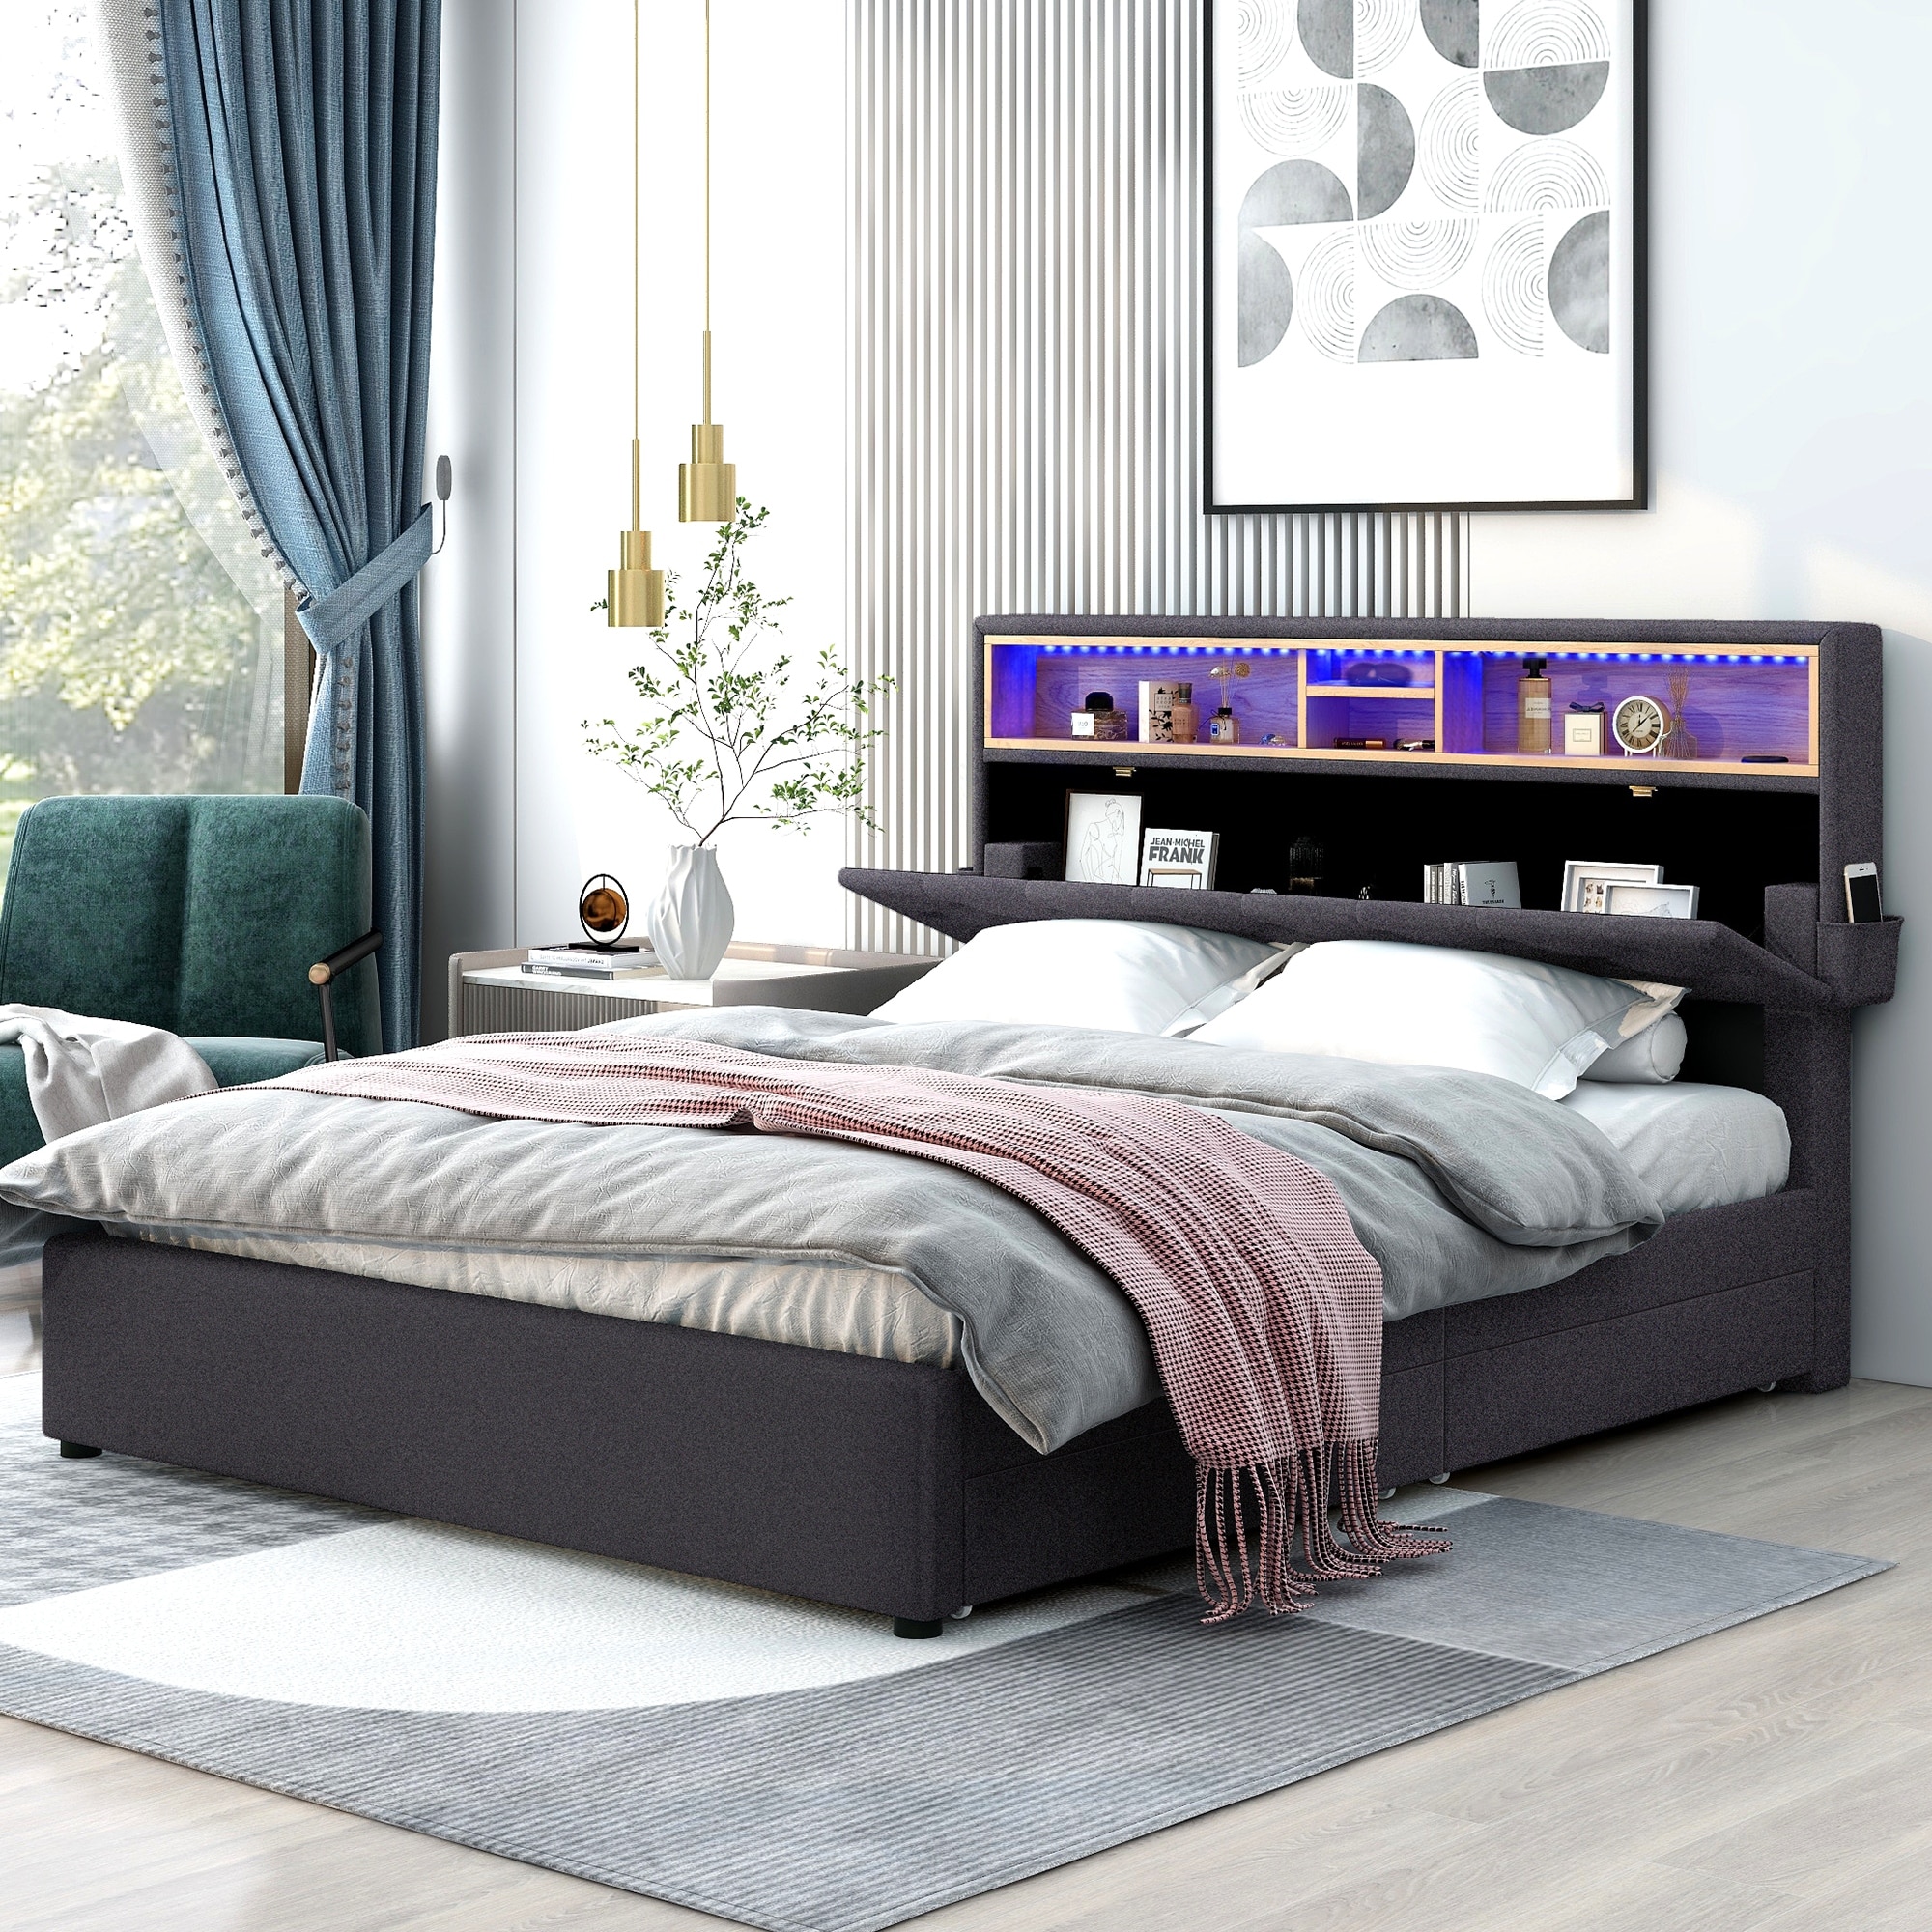 https://ak1.ostkcdn.com/images/products/is/images/direct/7a5f65e28a400e5f421666576a69f1caf13c5e52/Queen-Modern-Upholstered-Platform-Bed-with-Storage-Headboard-and-USB-Port%2C-Wood-Bed-Frame-with-2-Drawers%2C-No-Box-Spring-Needed.jpg